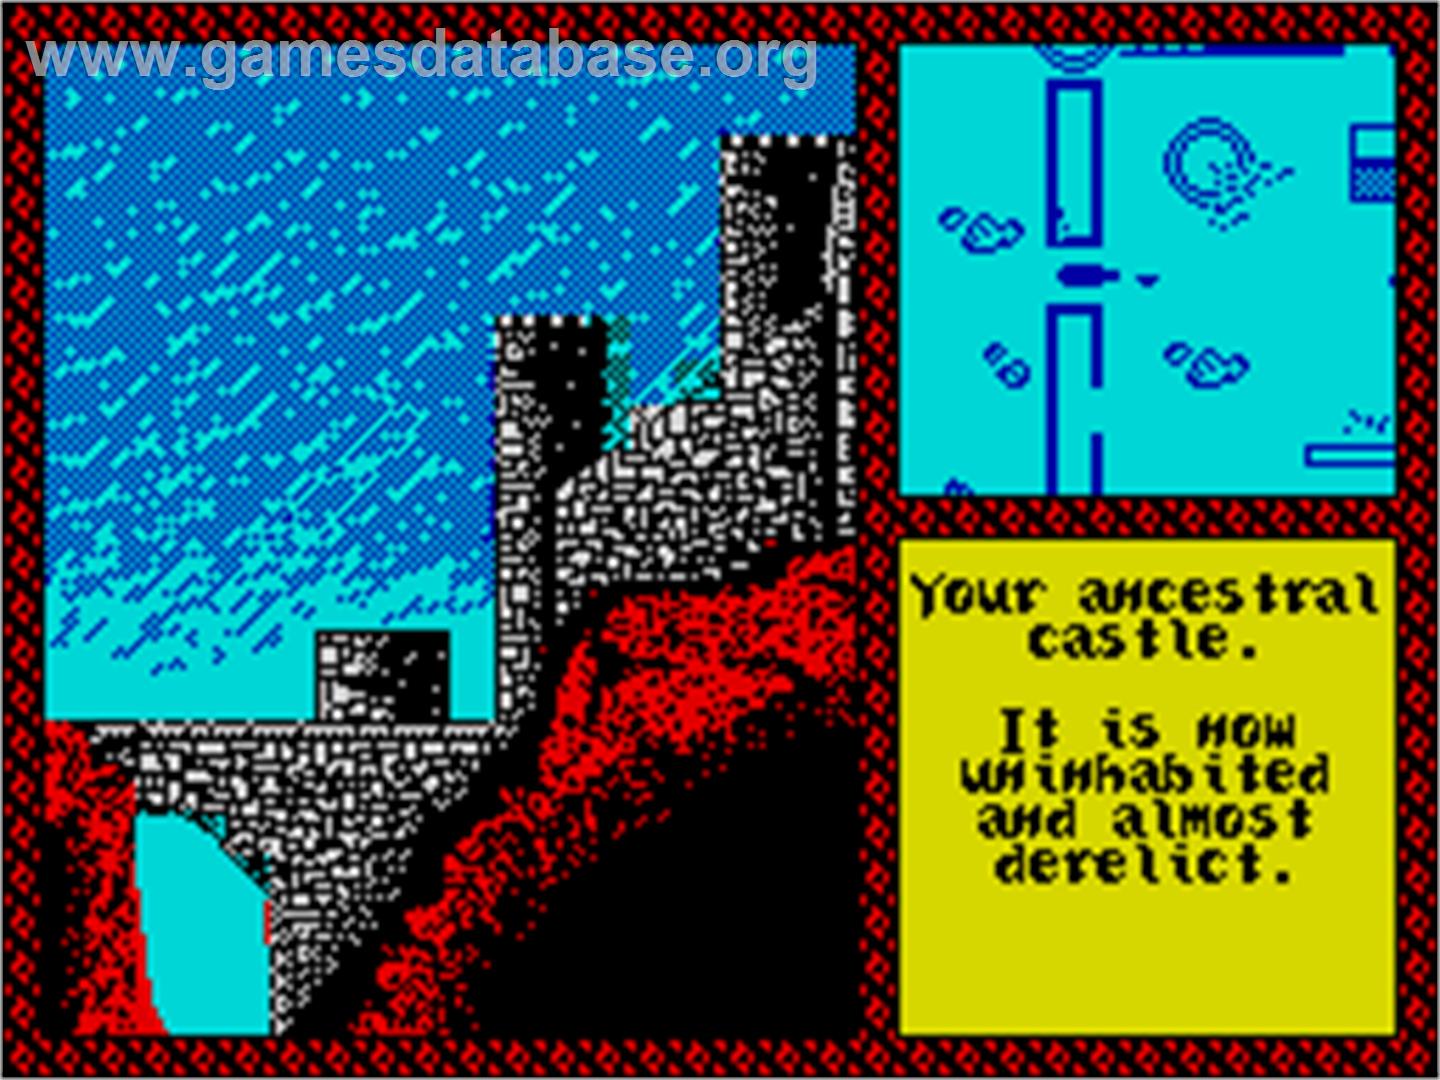 Iron Lord - Sinclair ZX Spectrum - Artwork - In Game